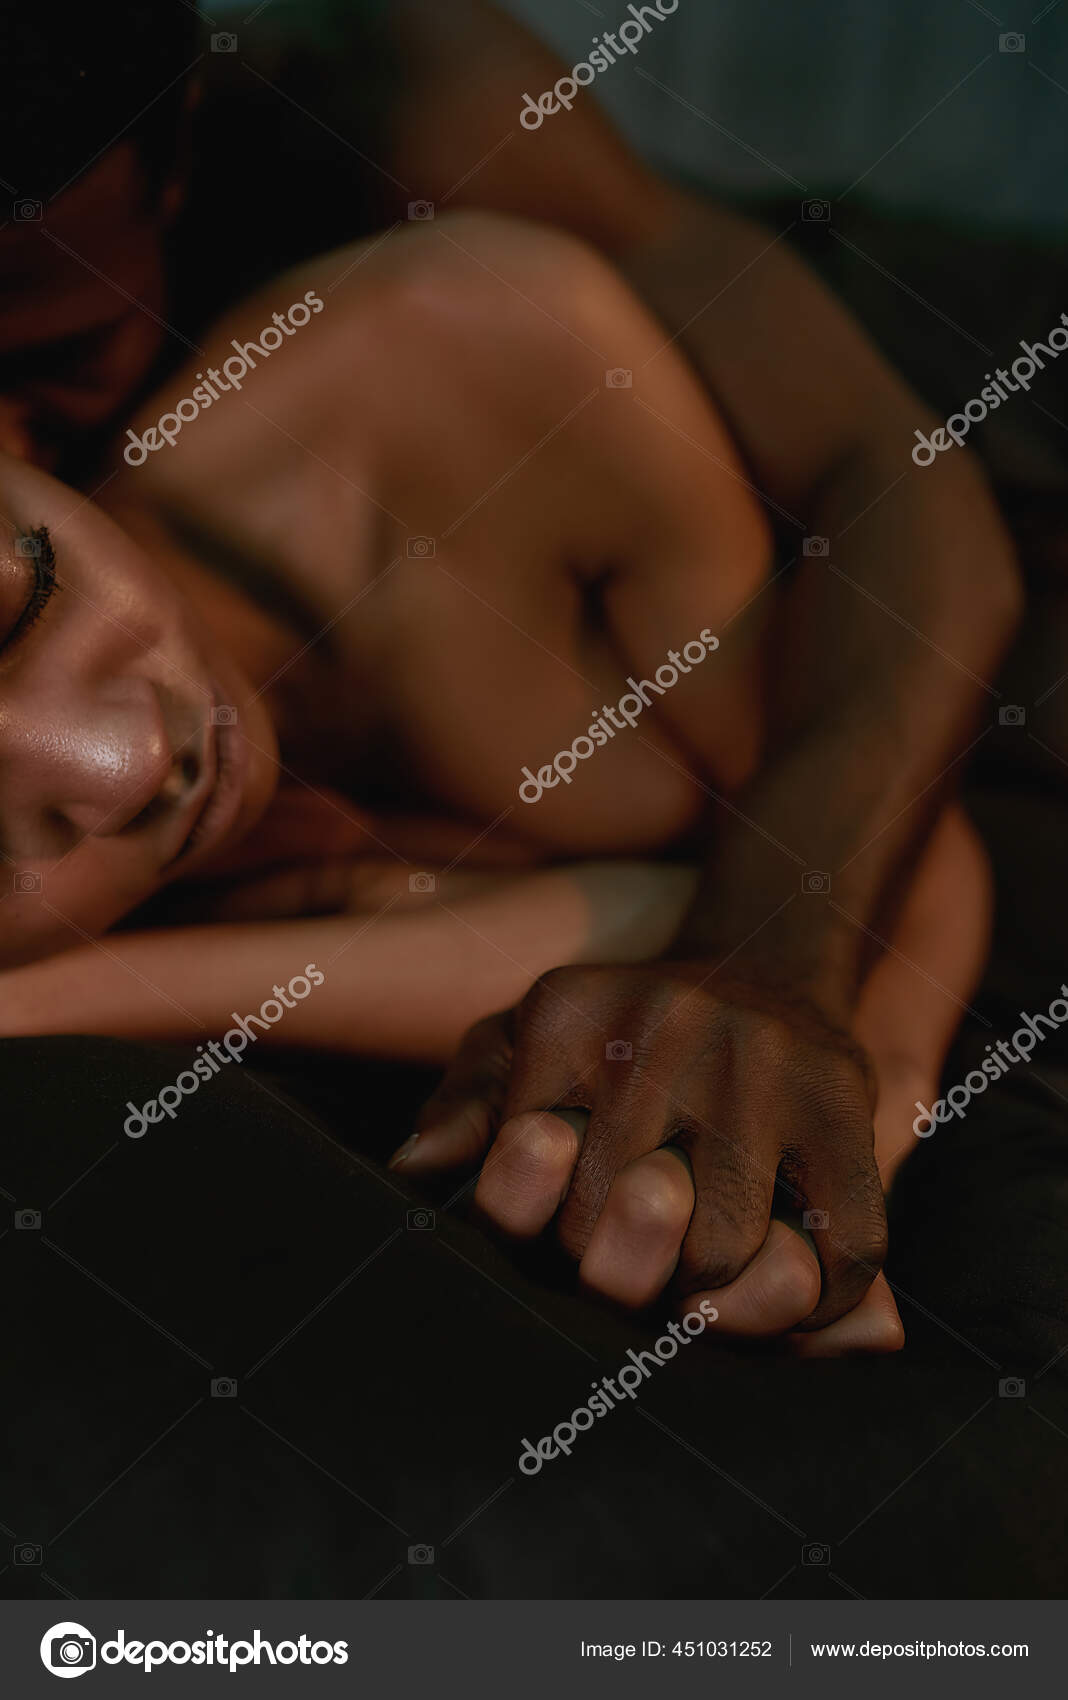 Nude lying down face up - Sex photo